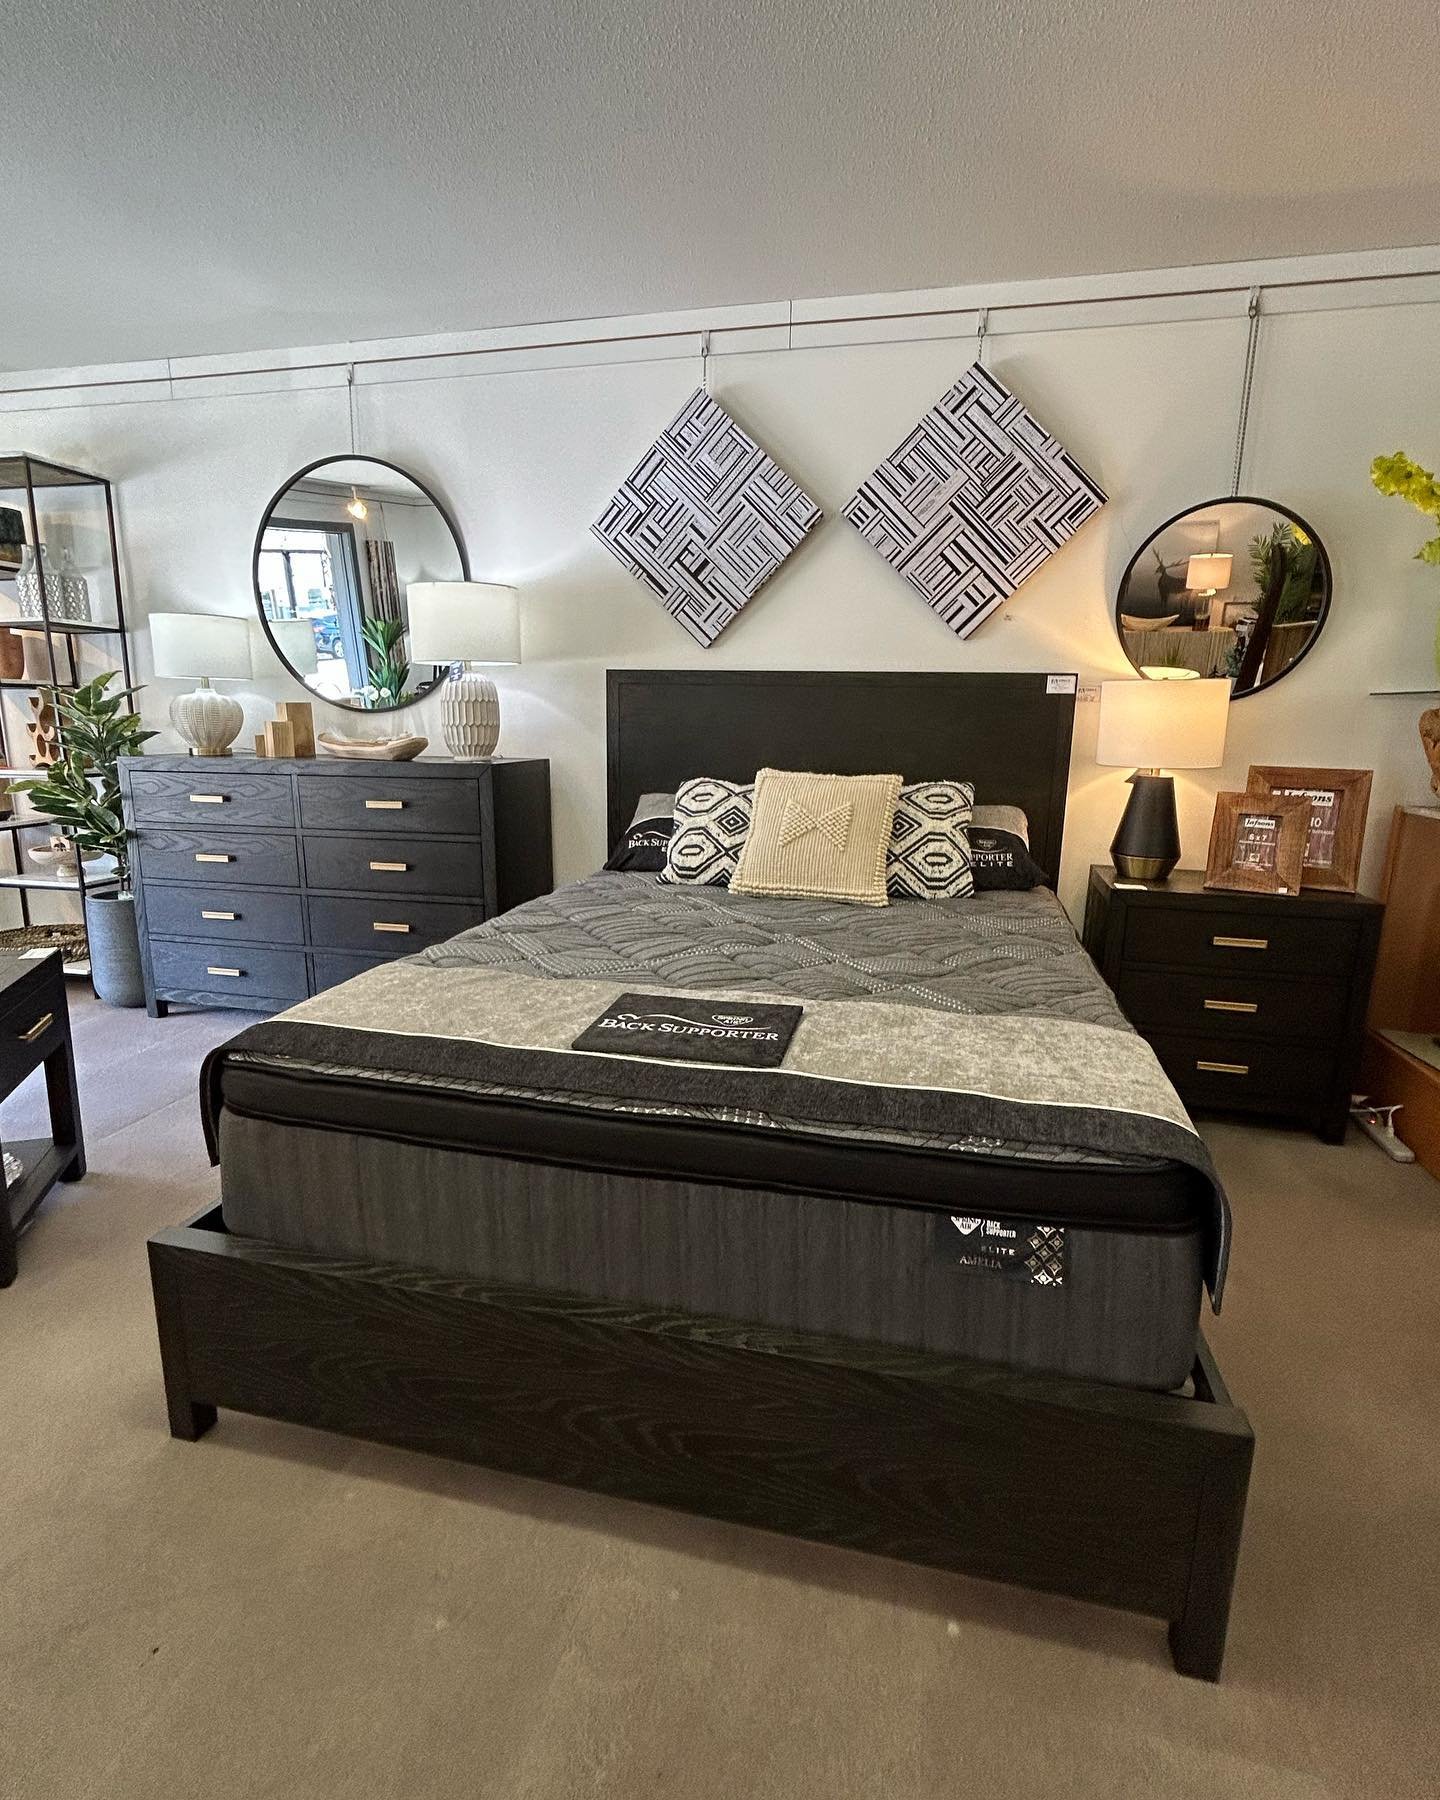 Have you seen our new &lsquo;Fresno&rsquo; #bedroom suite? This #sleek #design is now #featured front and centre on our #showroom floor. It #delivers unmatched #class to any bedroom with #quality and #function to match. Pop in and check it out next t